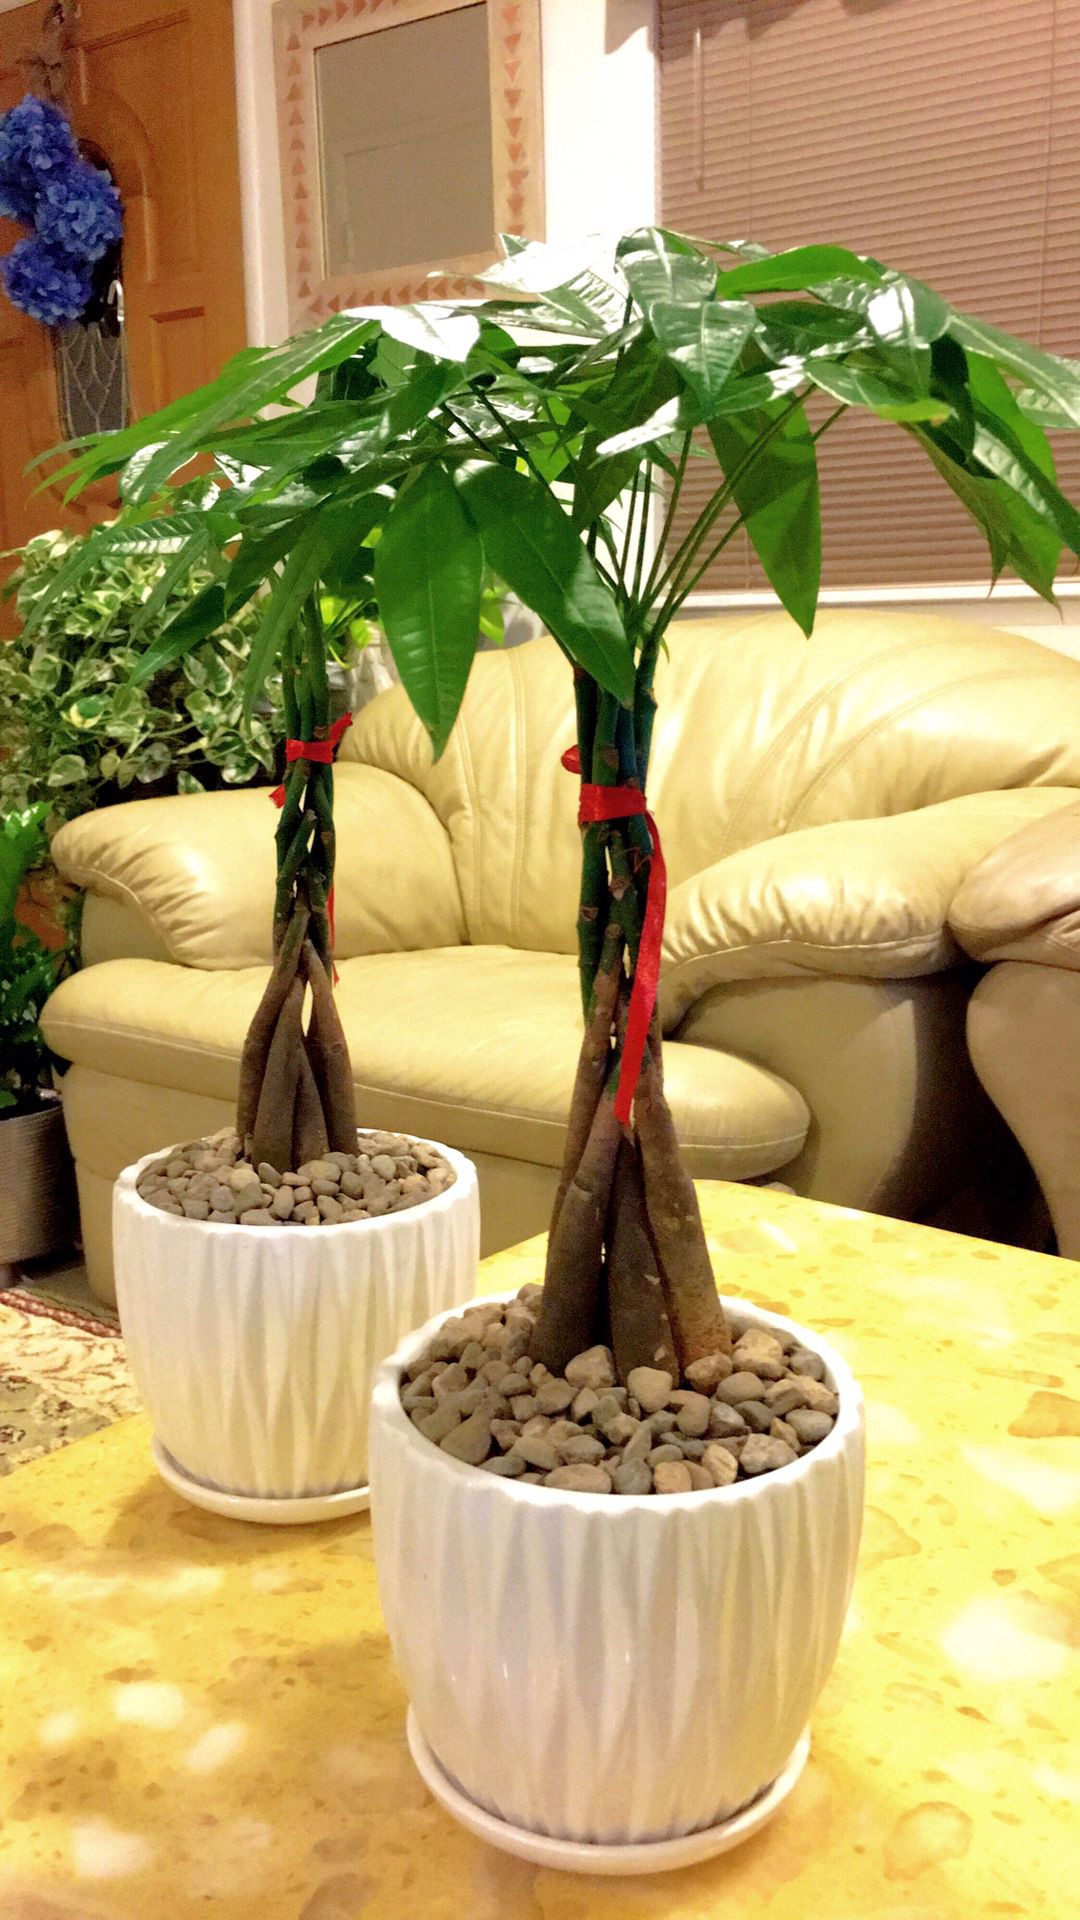 Lucky Money Tree Plants - Up to 18” tall total - $12 each